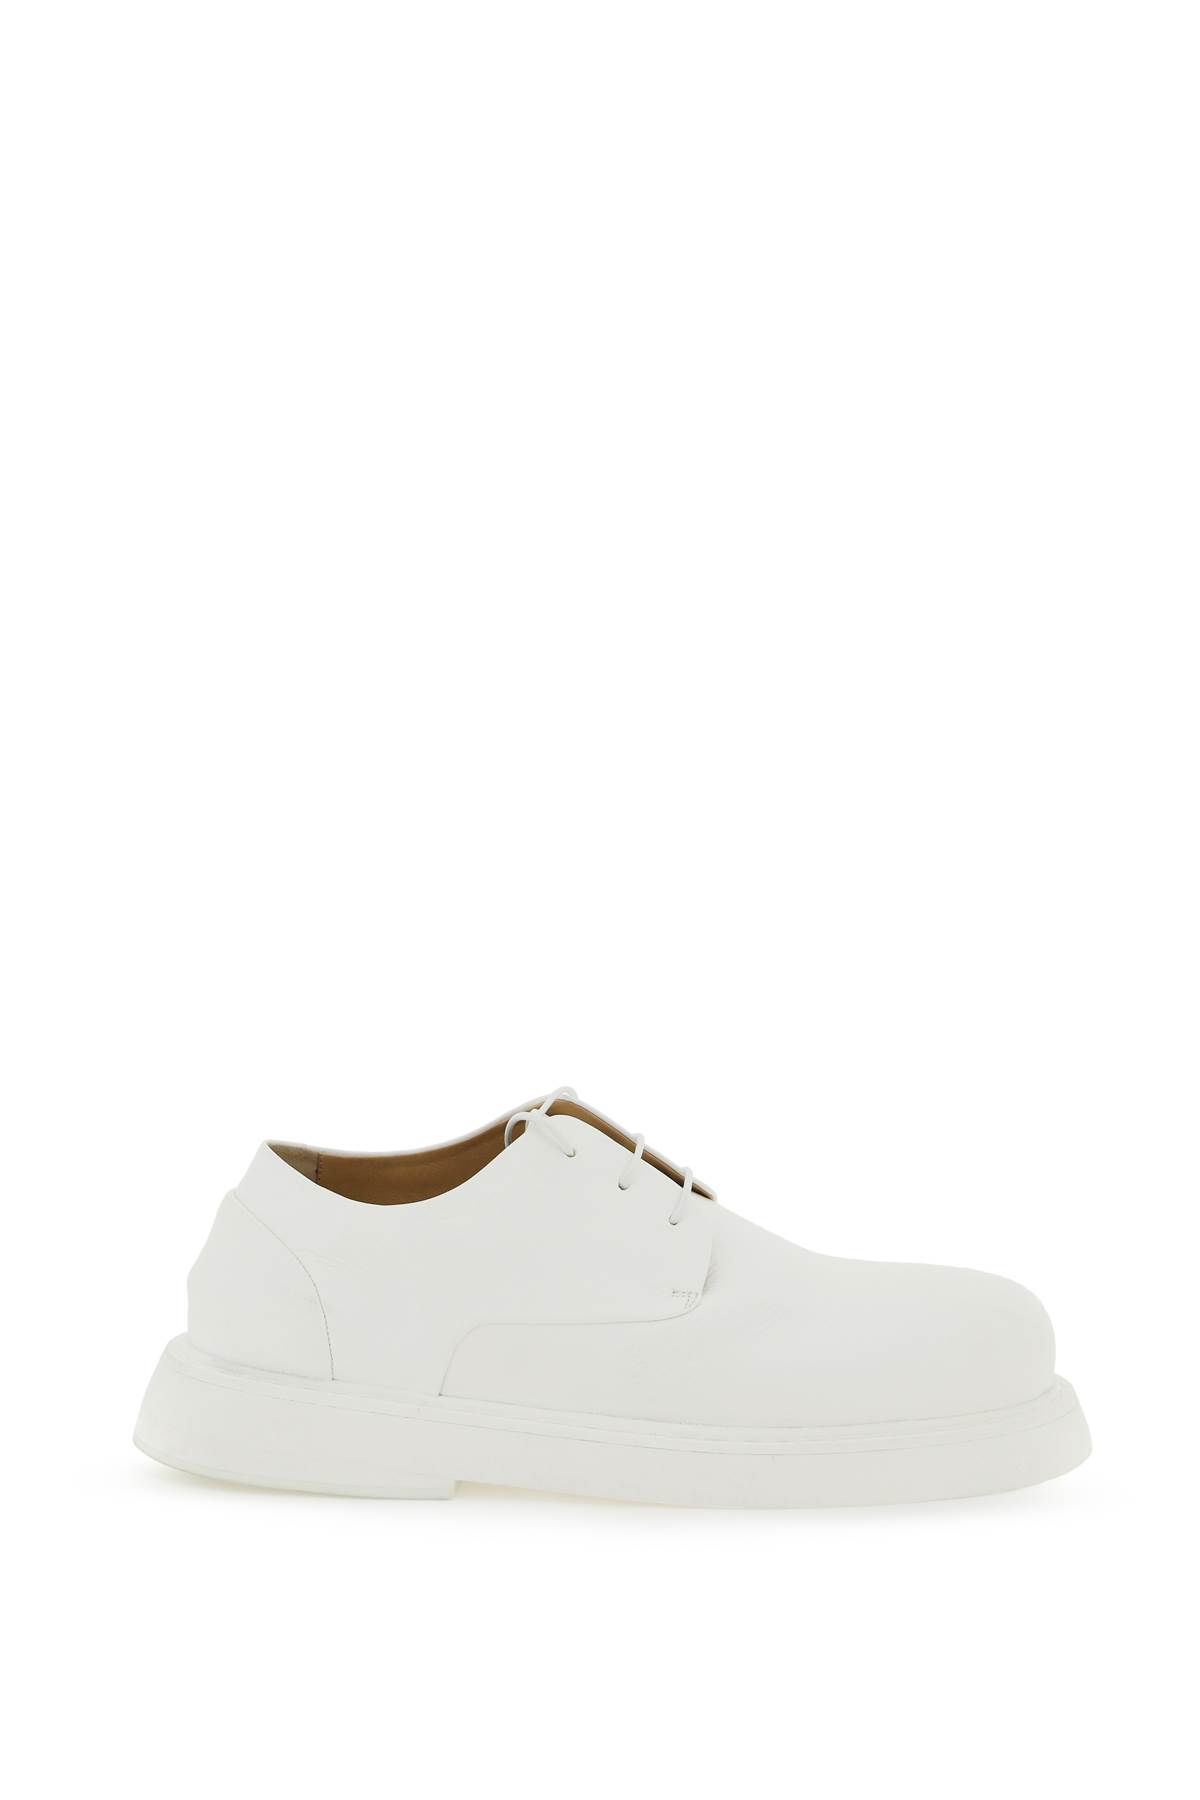 Marsell spalla Leather Lace-ups